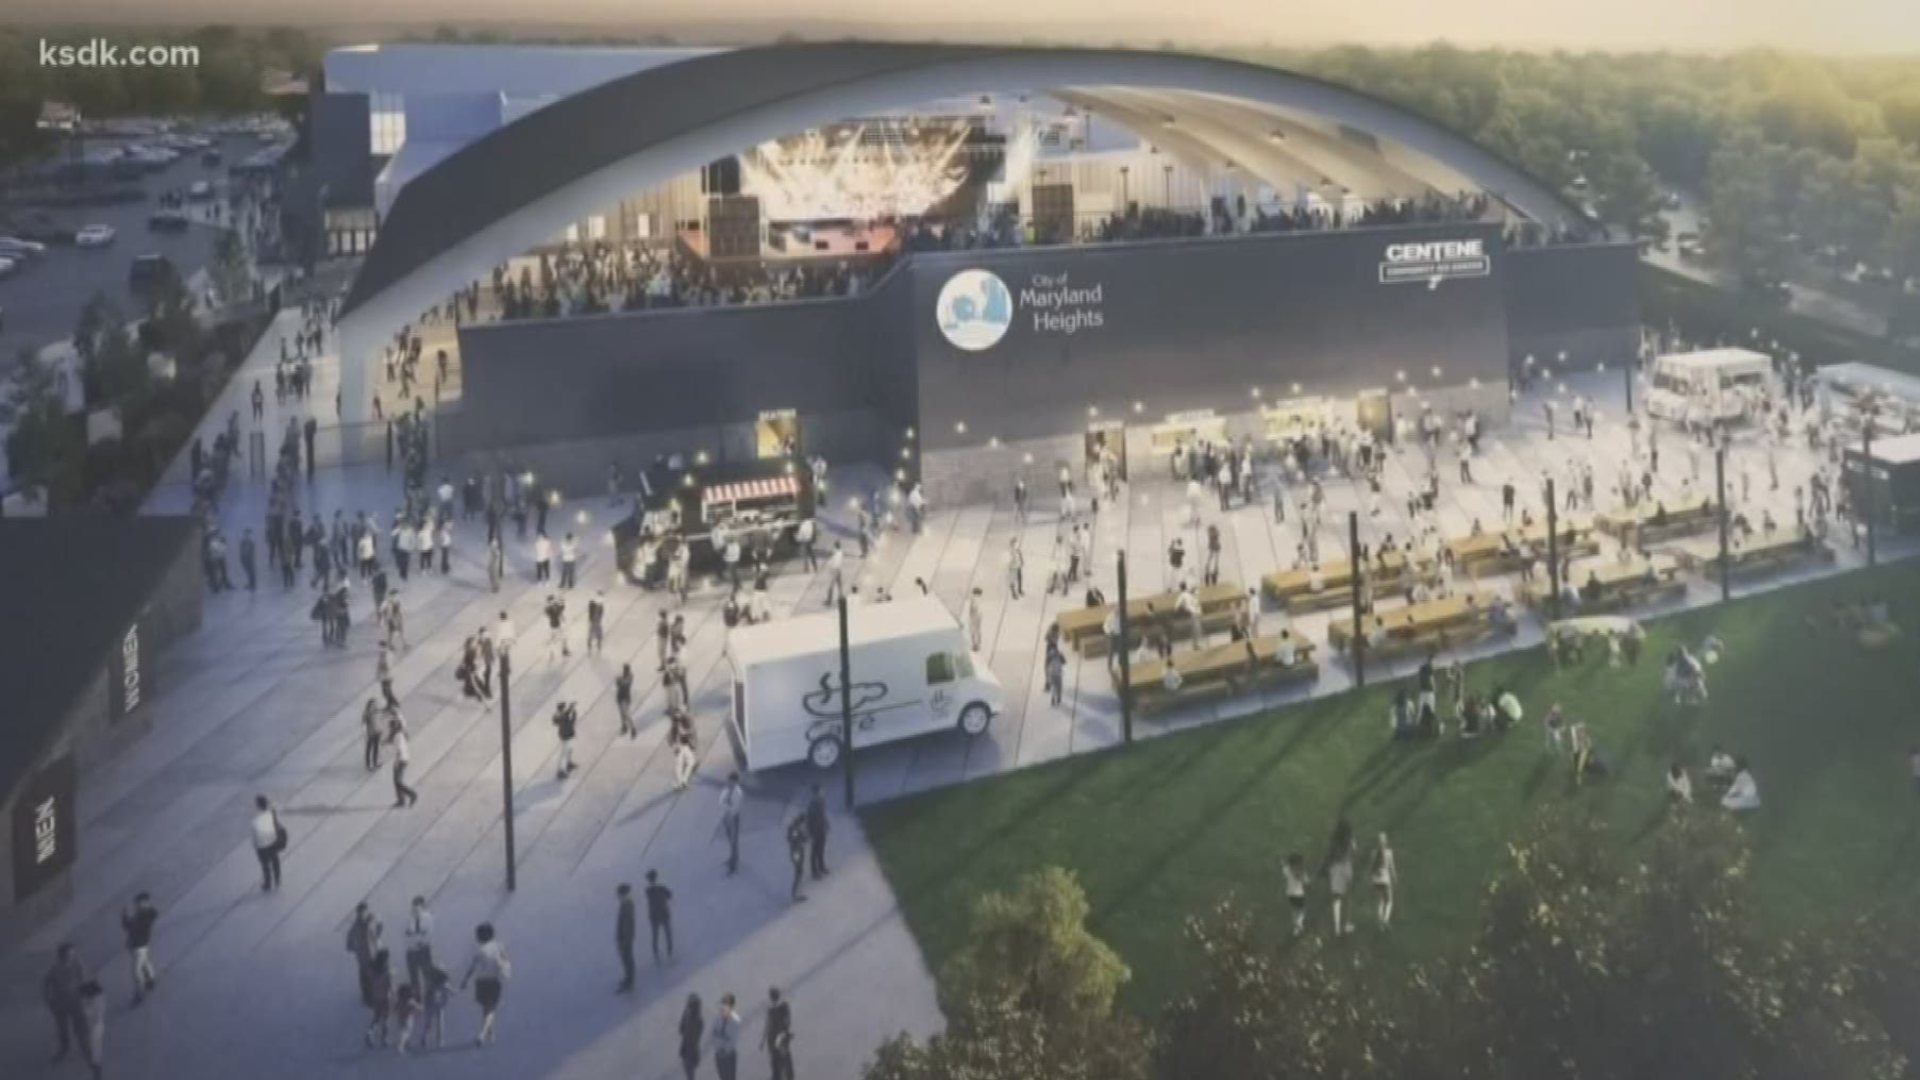 Saint Louis Music Park is set to open in May